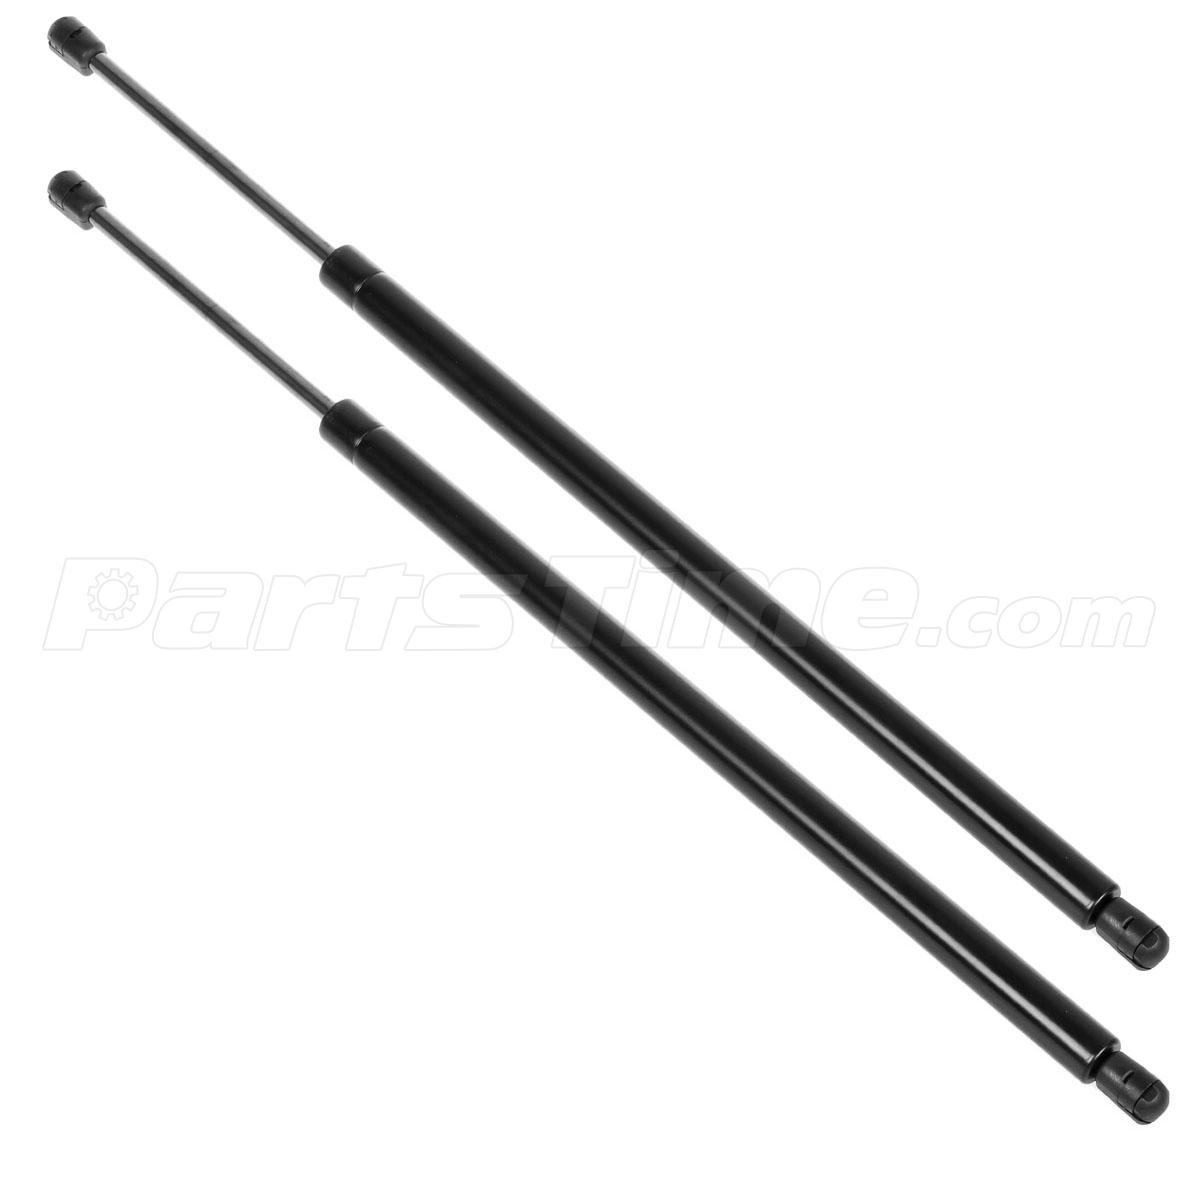 2005 Chrysler pacifica struts and shocks #2